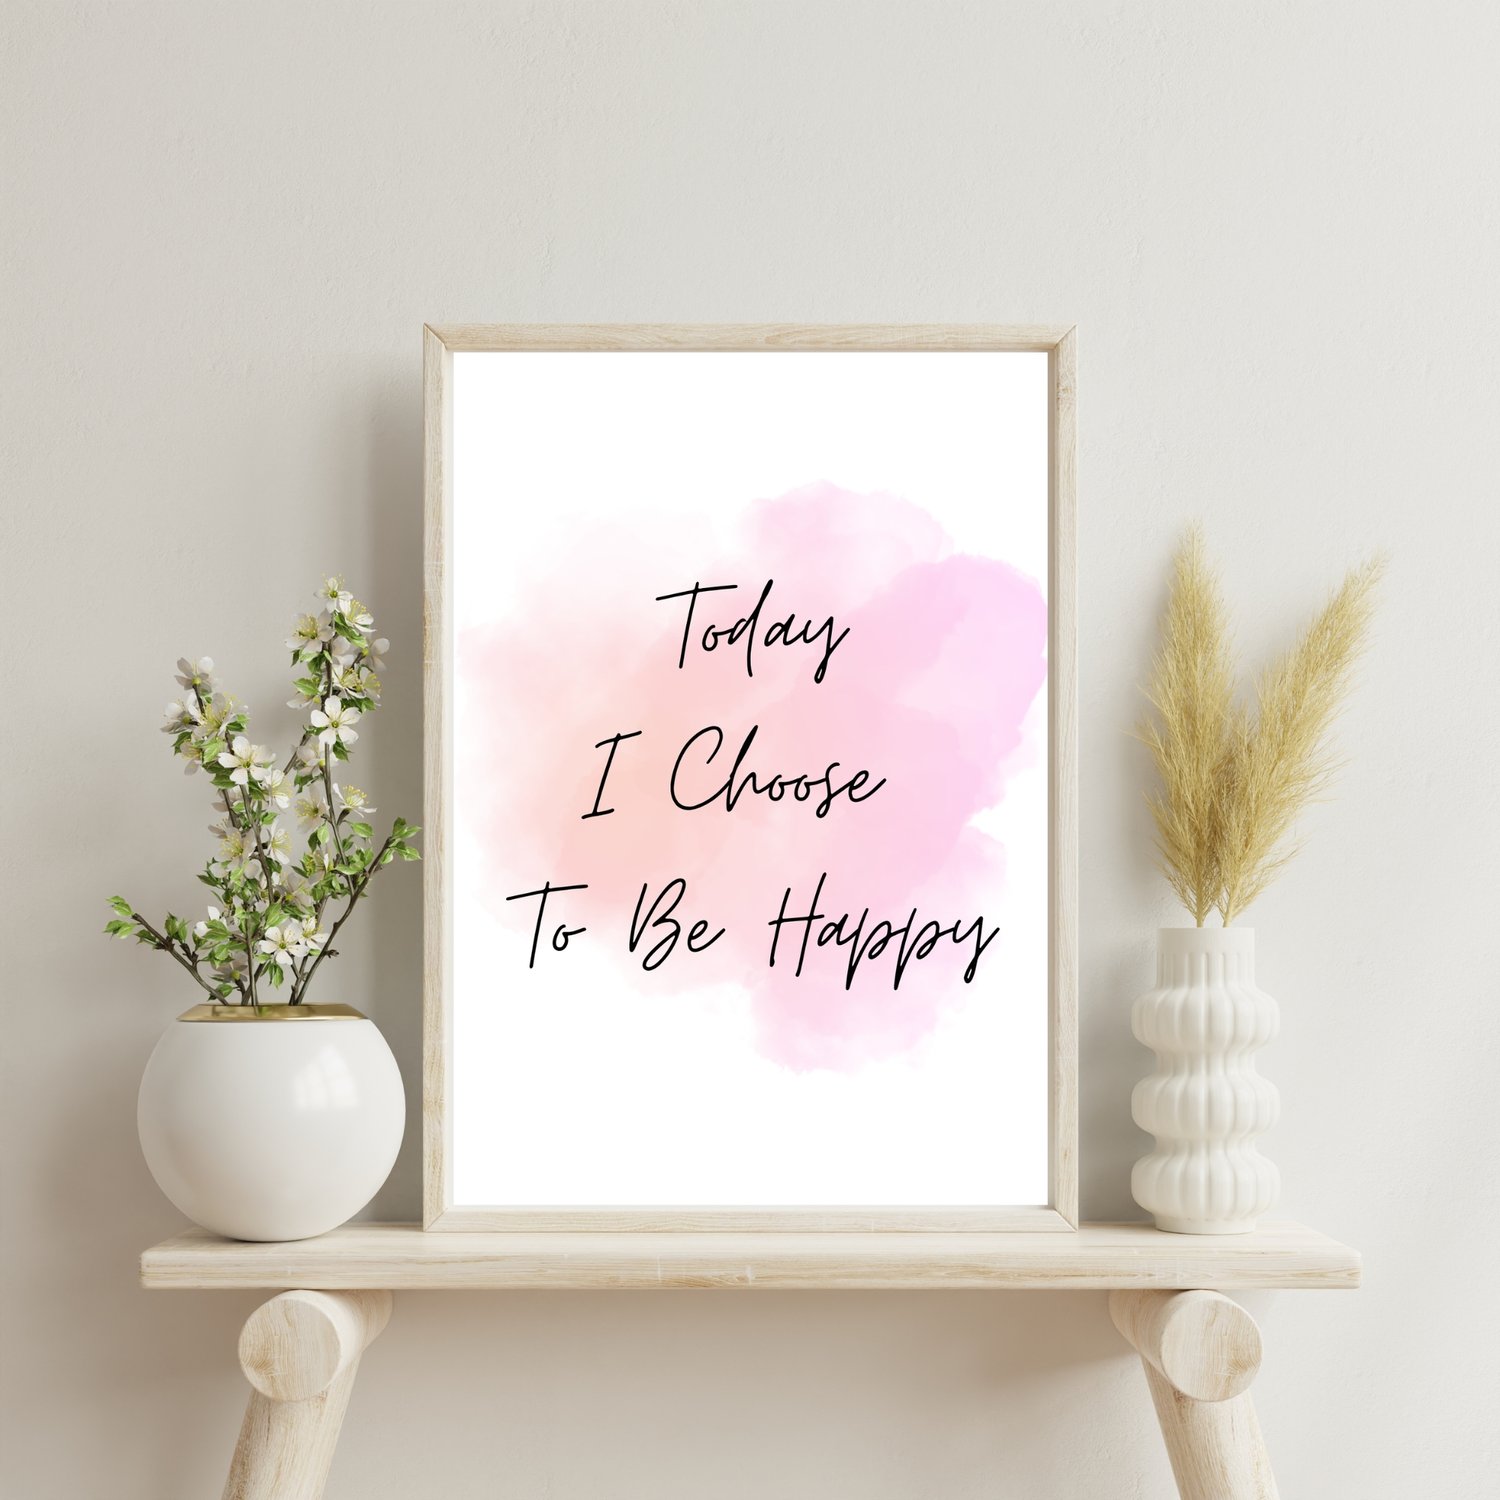 Motivational Canvas Art Designed to Inspire You Every Day